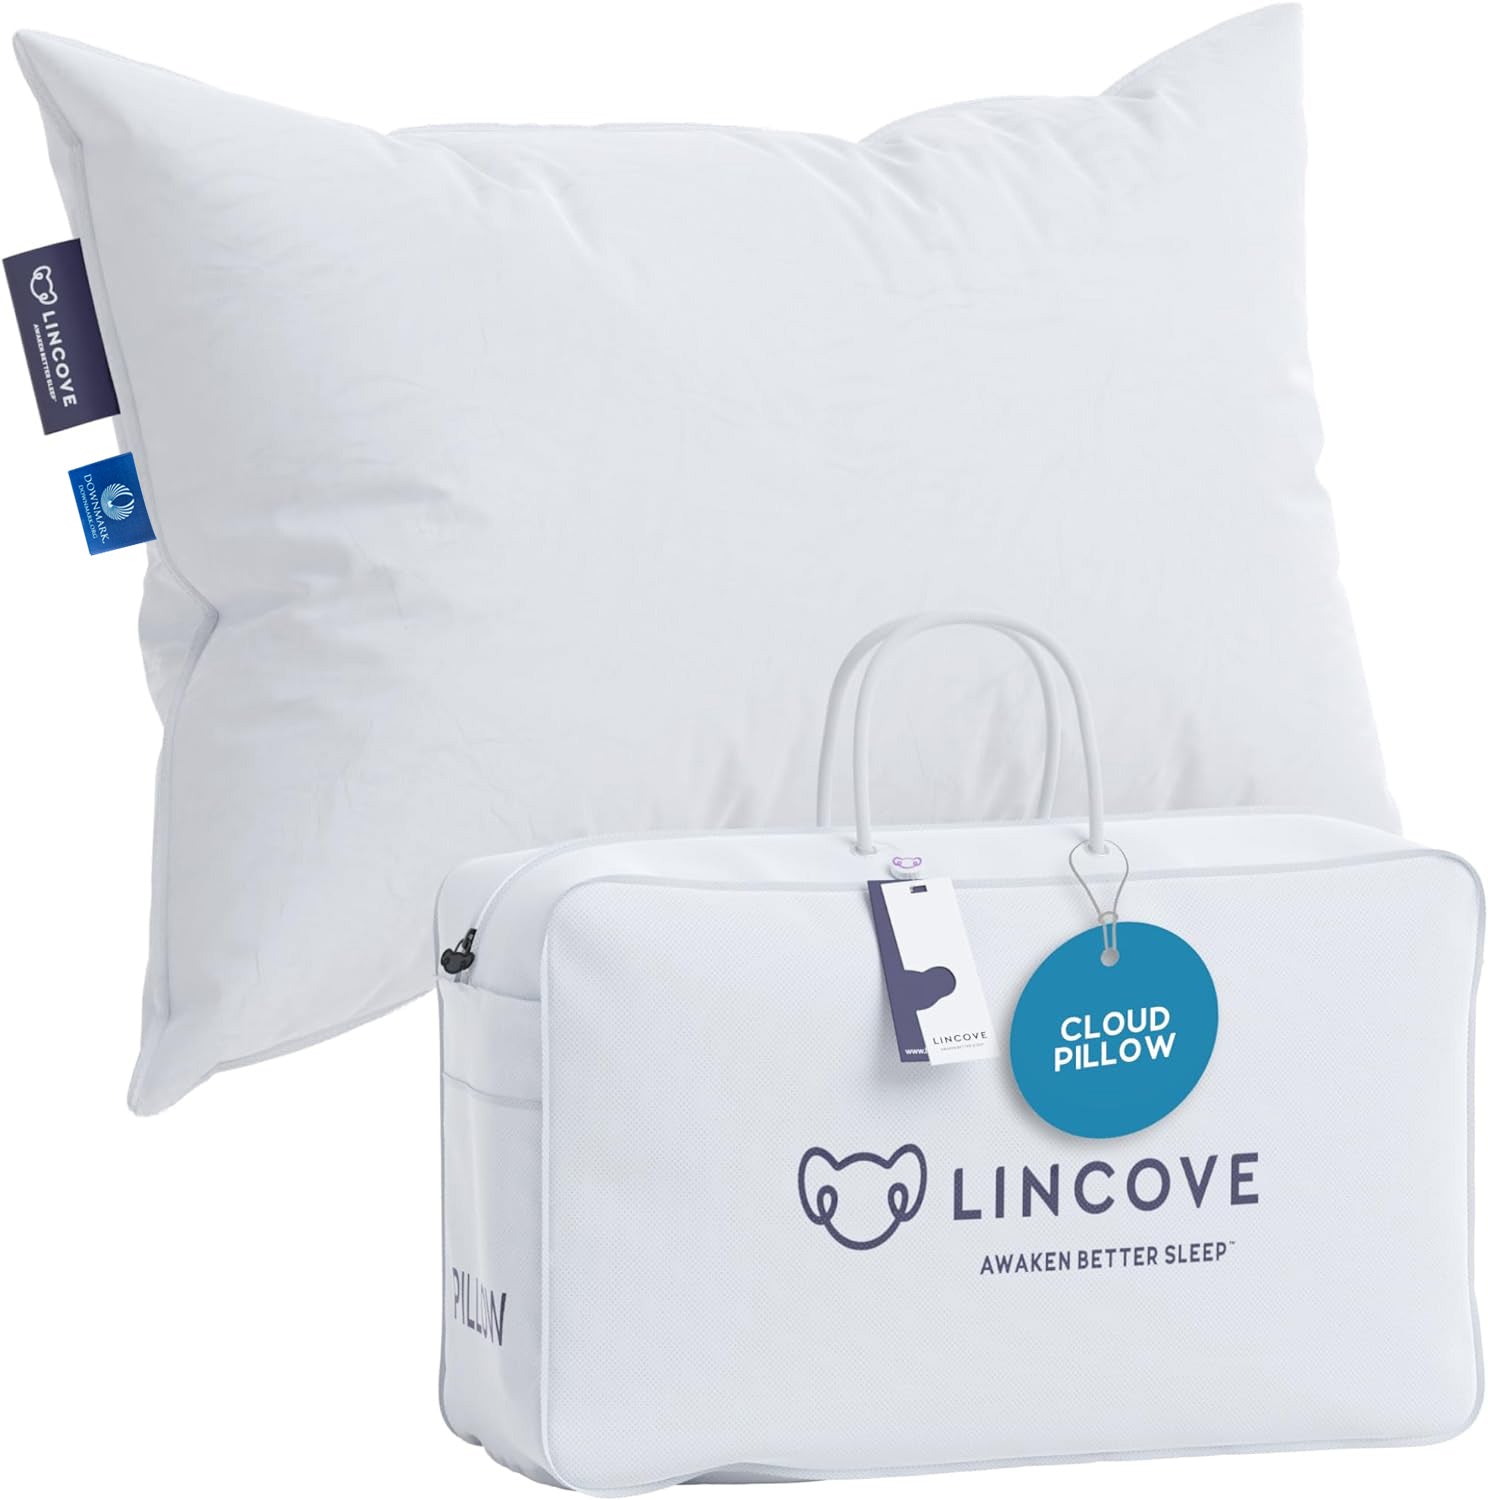 Lincove Cloud Natural Canadian White Down Luxury Sleeping Pillow - 625 Fill Power, 500 Thread Count Cotton Shell, Made in Canada (Standard - Medium)